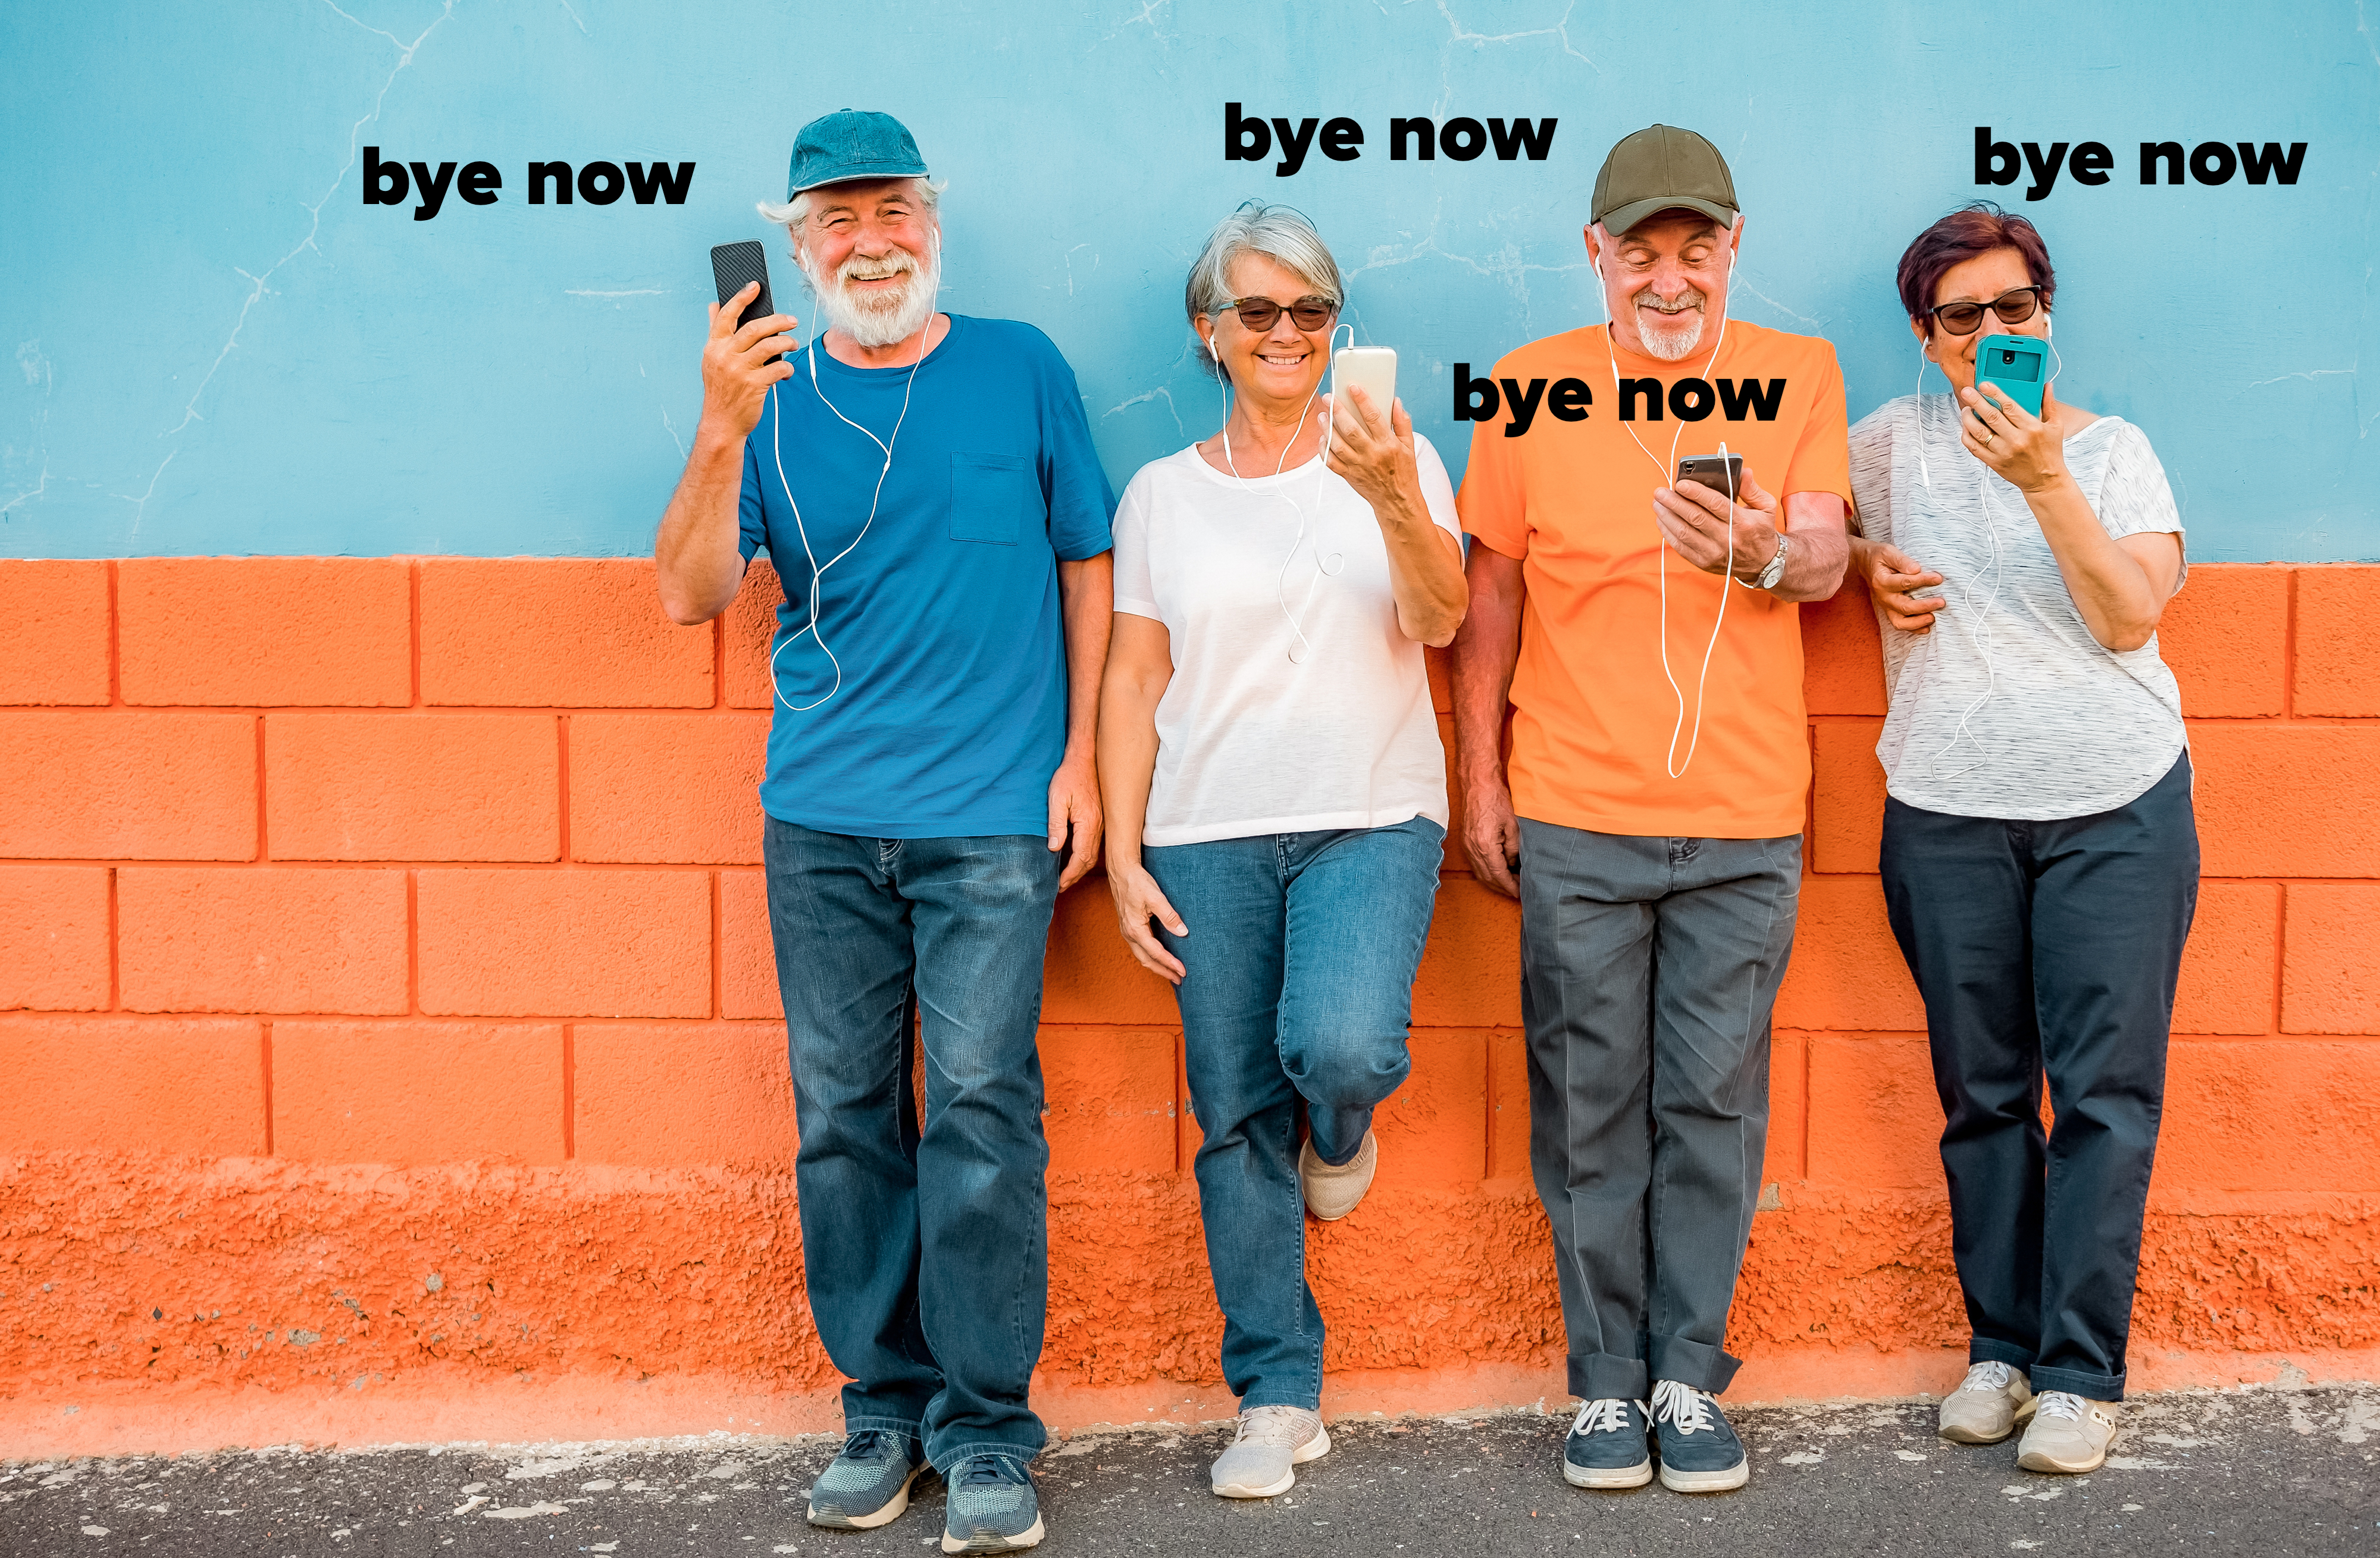 A bunch of old people holding phones and saying &quot;bye now&quot;